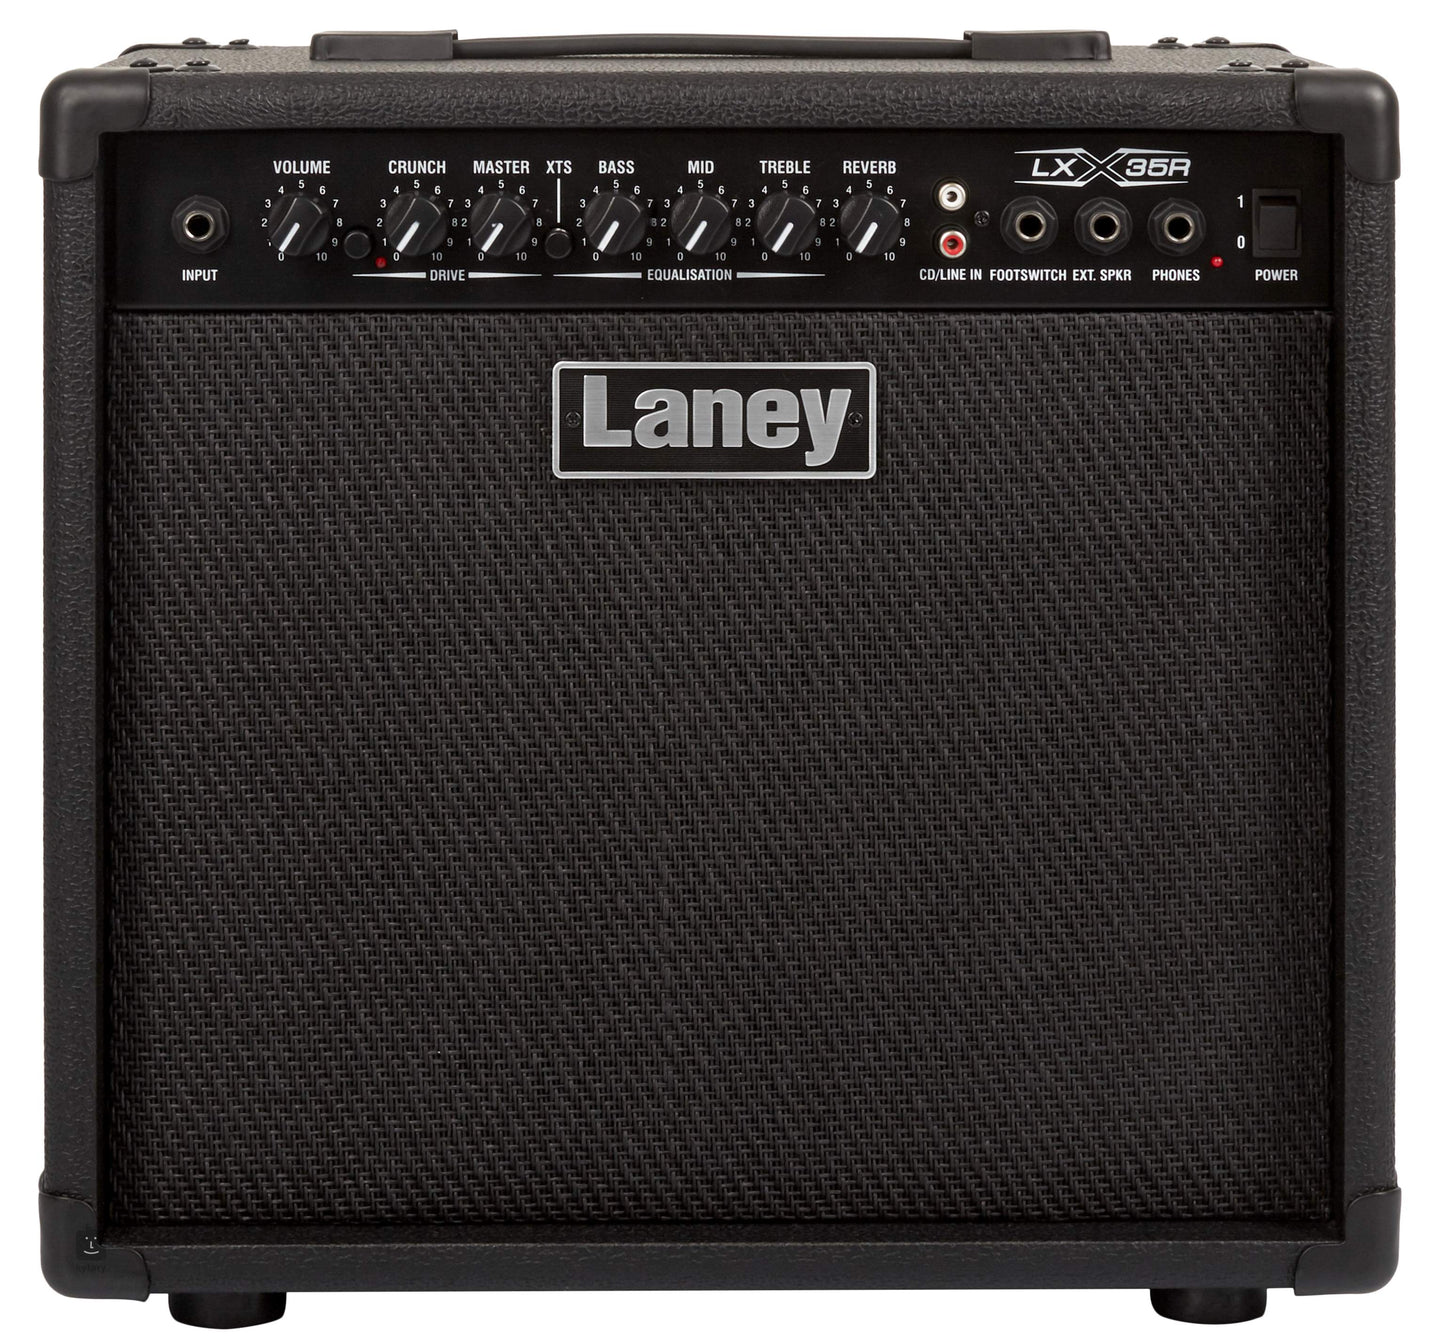 Laney LX35R 35 Watts Twin Channel Guitar Amplifier with 3-Band EQ Tone and On-Board Reverb Feature